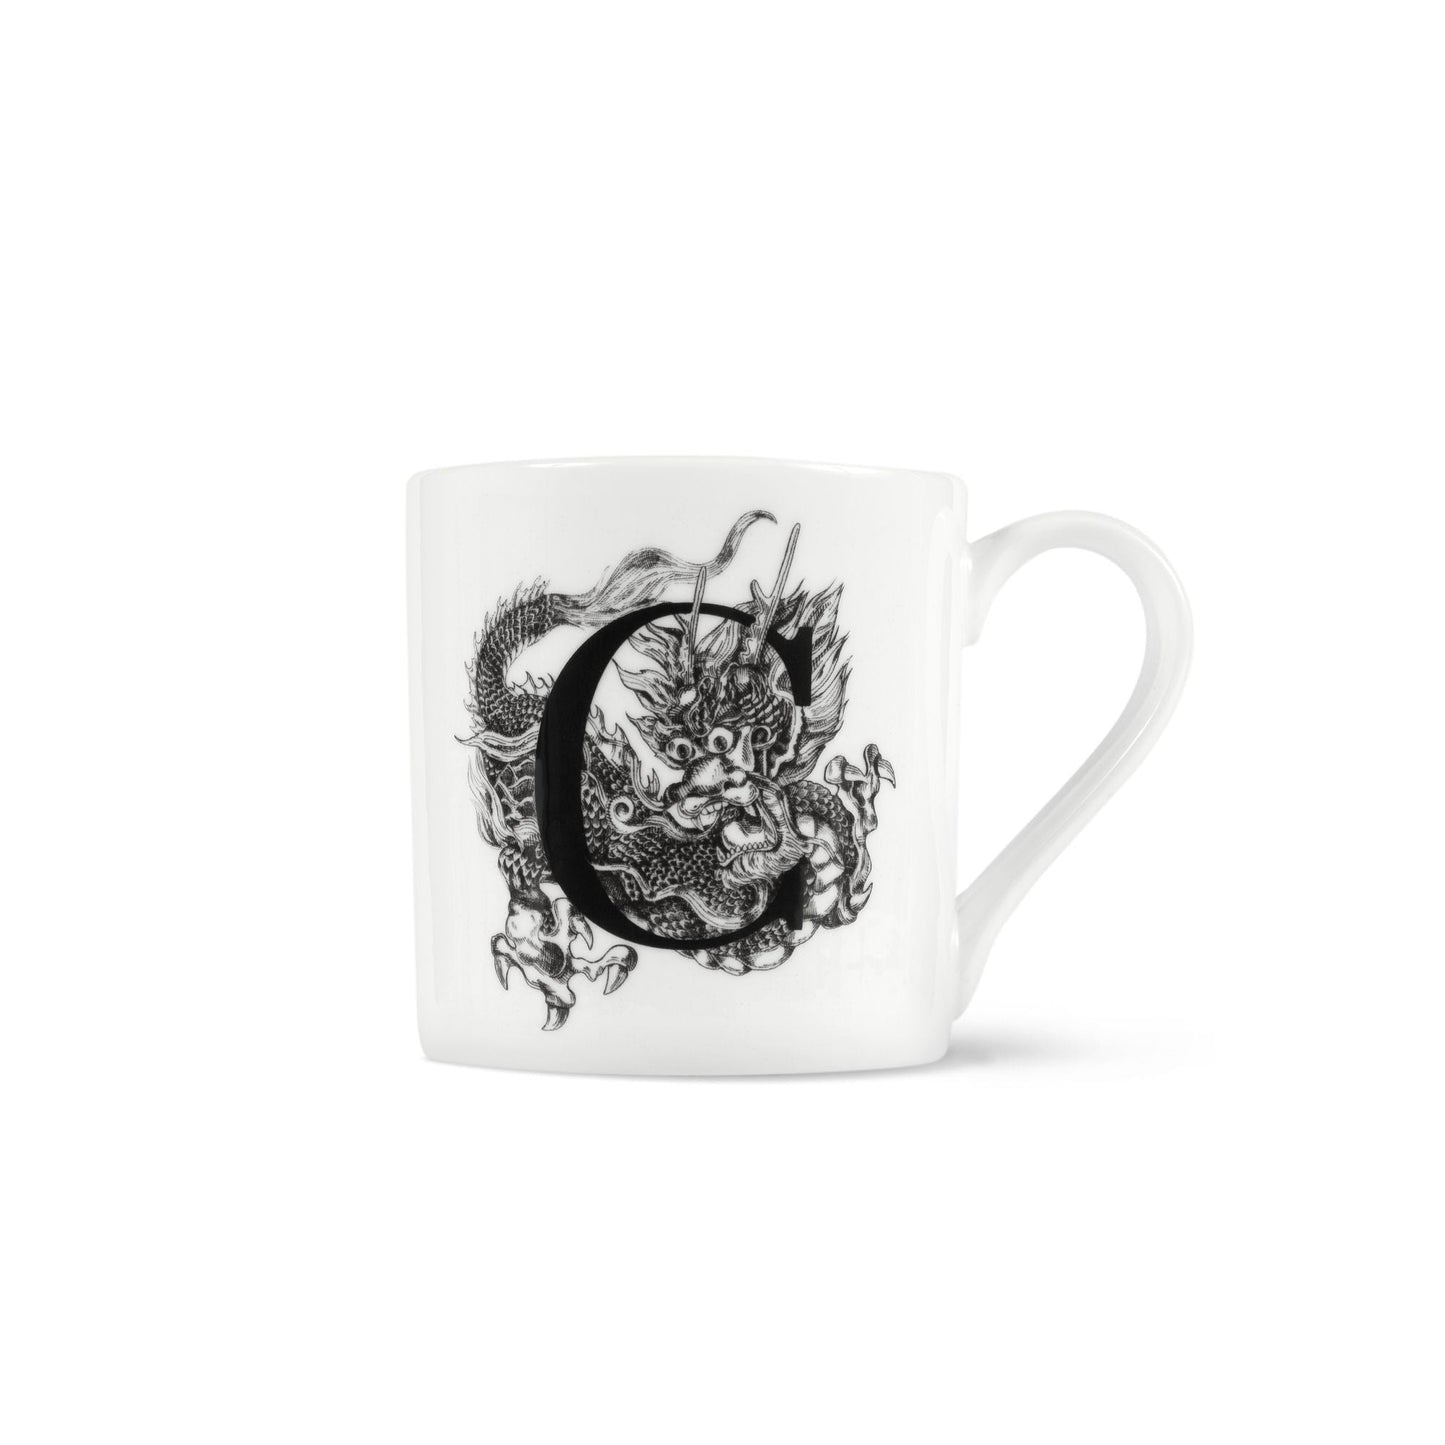 Letter C mug with simplified illustration showing a Chinese dragon.